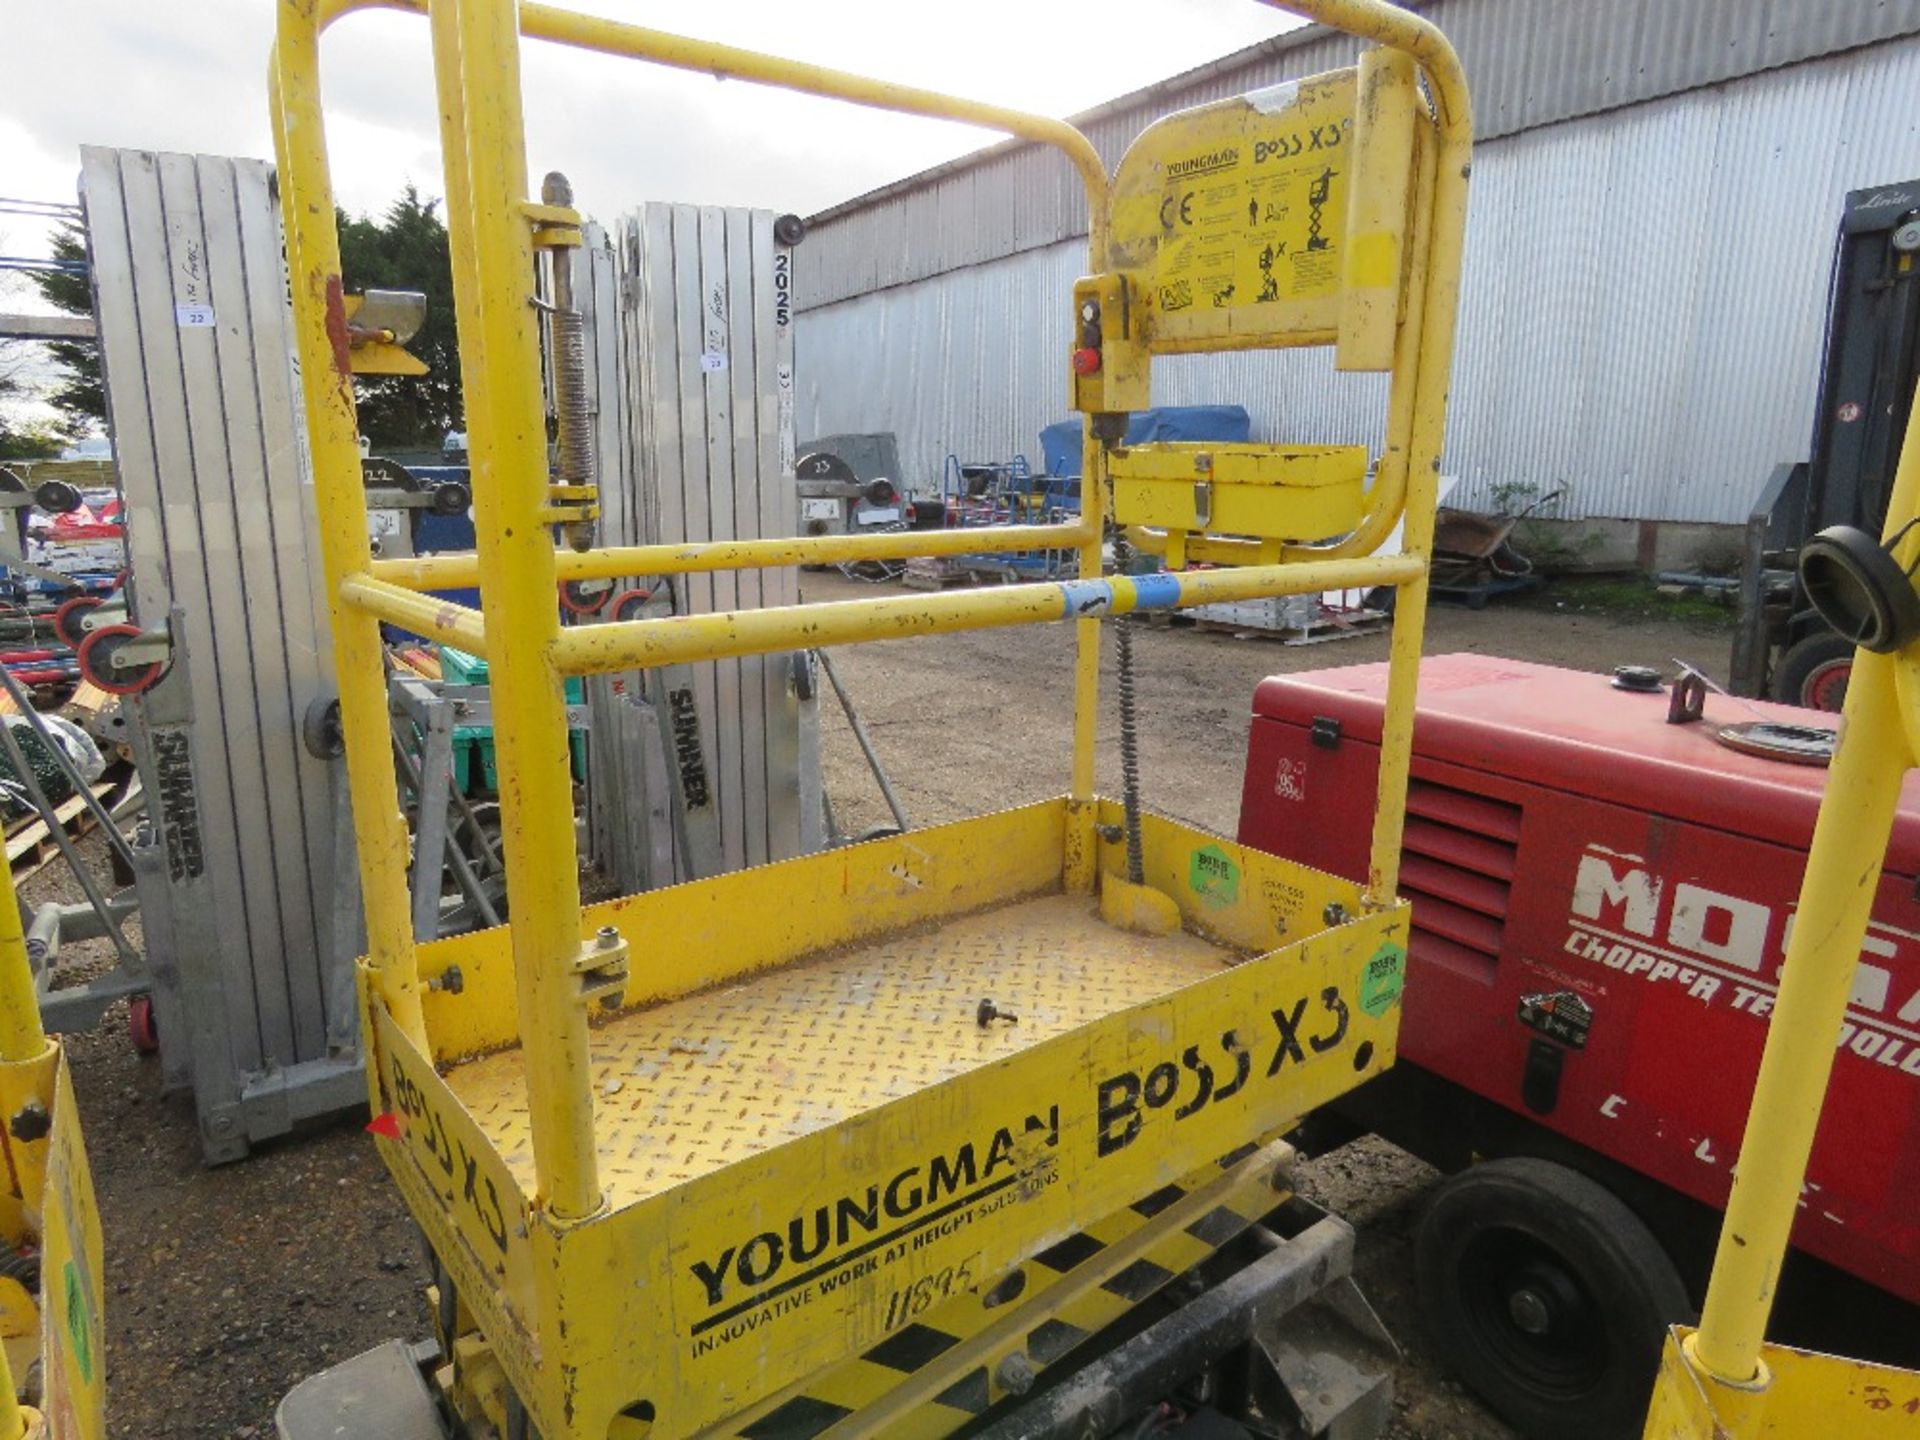 BOSS X3 BATTERY POWERED SCISSOR LIFT. UNTESTED, CONDITION UNKNOWN. - Image 3 of 3